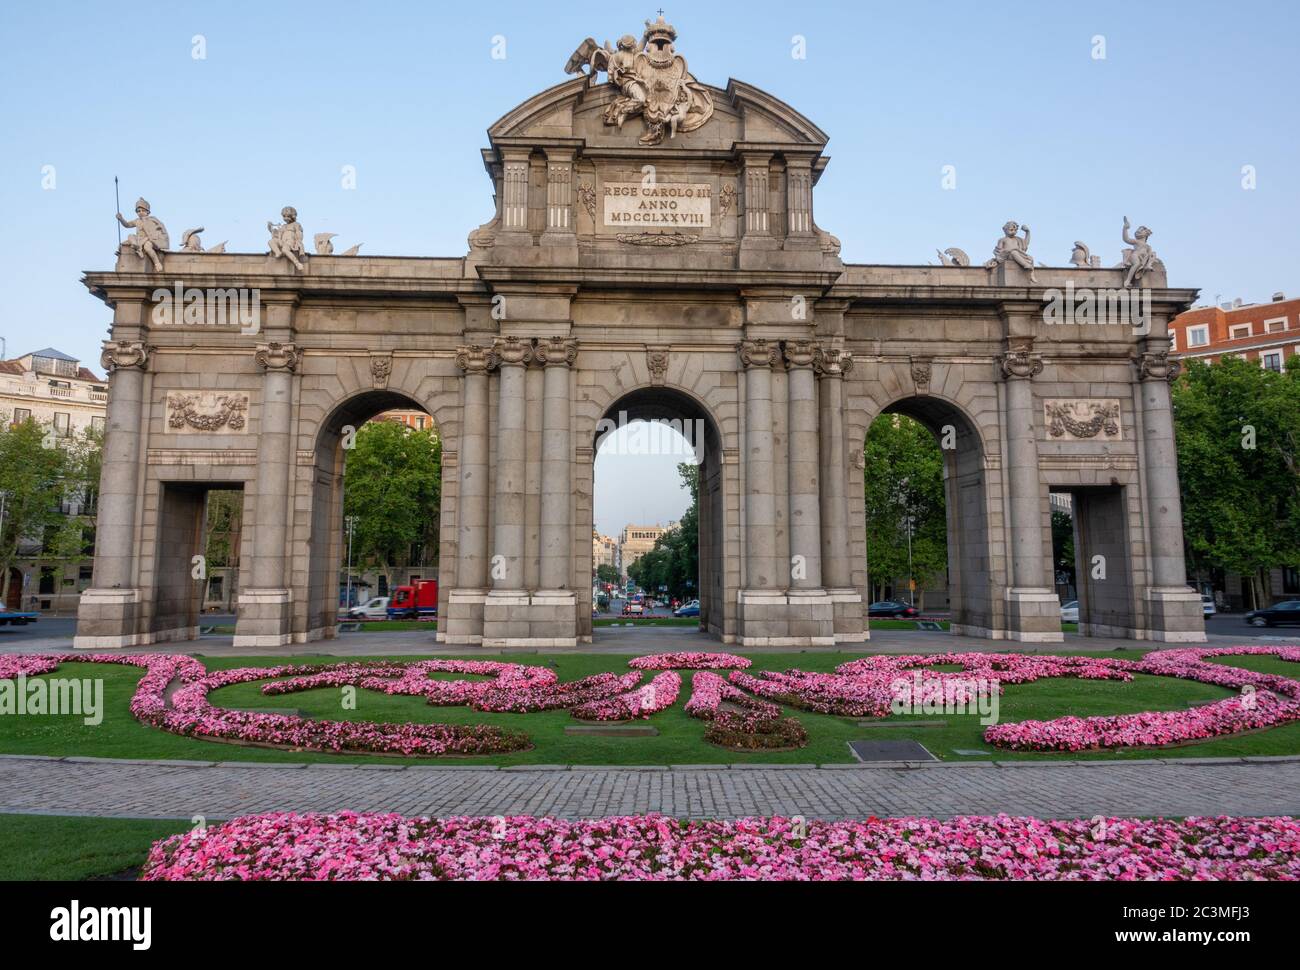 The Alcala Door  built in 1778 (Puerta de Alcala) is a gate in the center of Madrid, Spain. It is the landmark of the city. Stock Photo